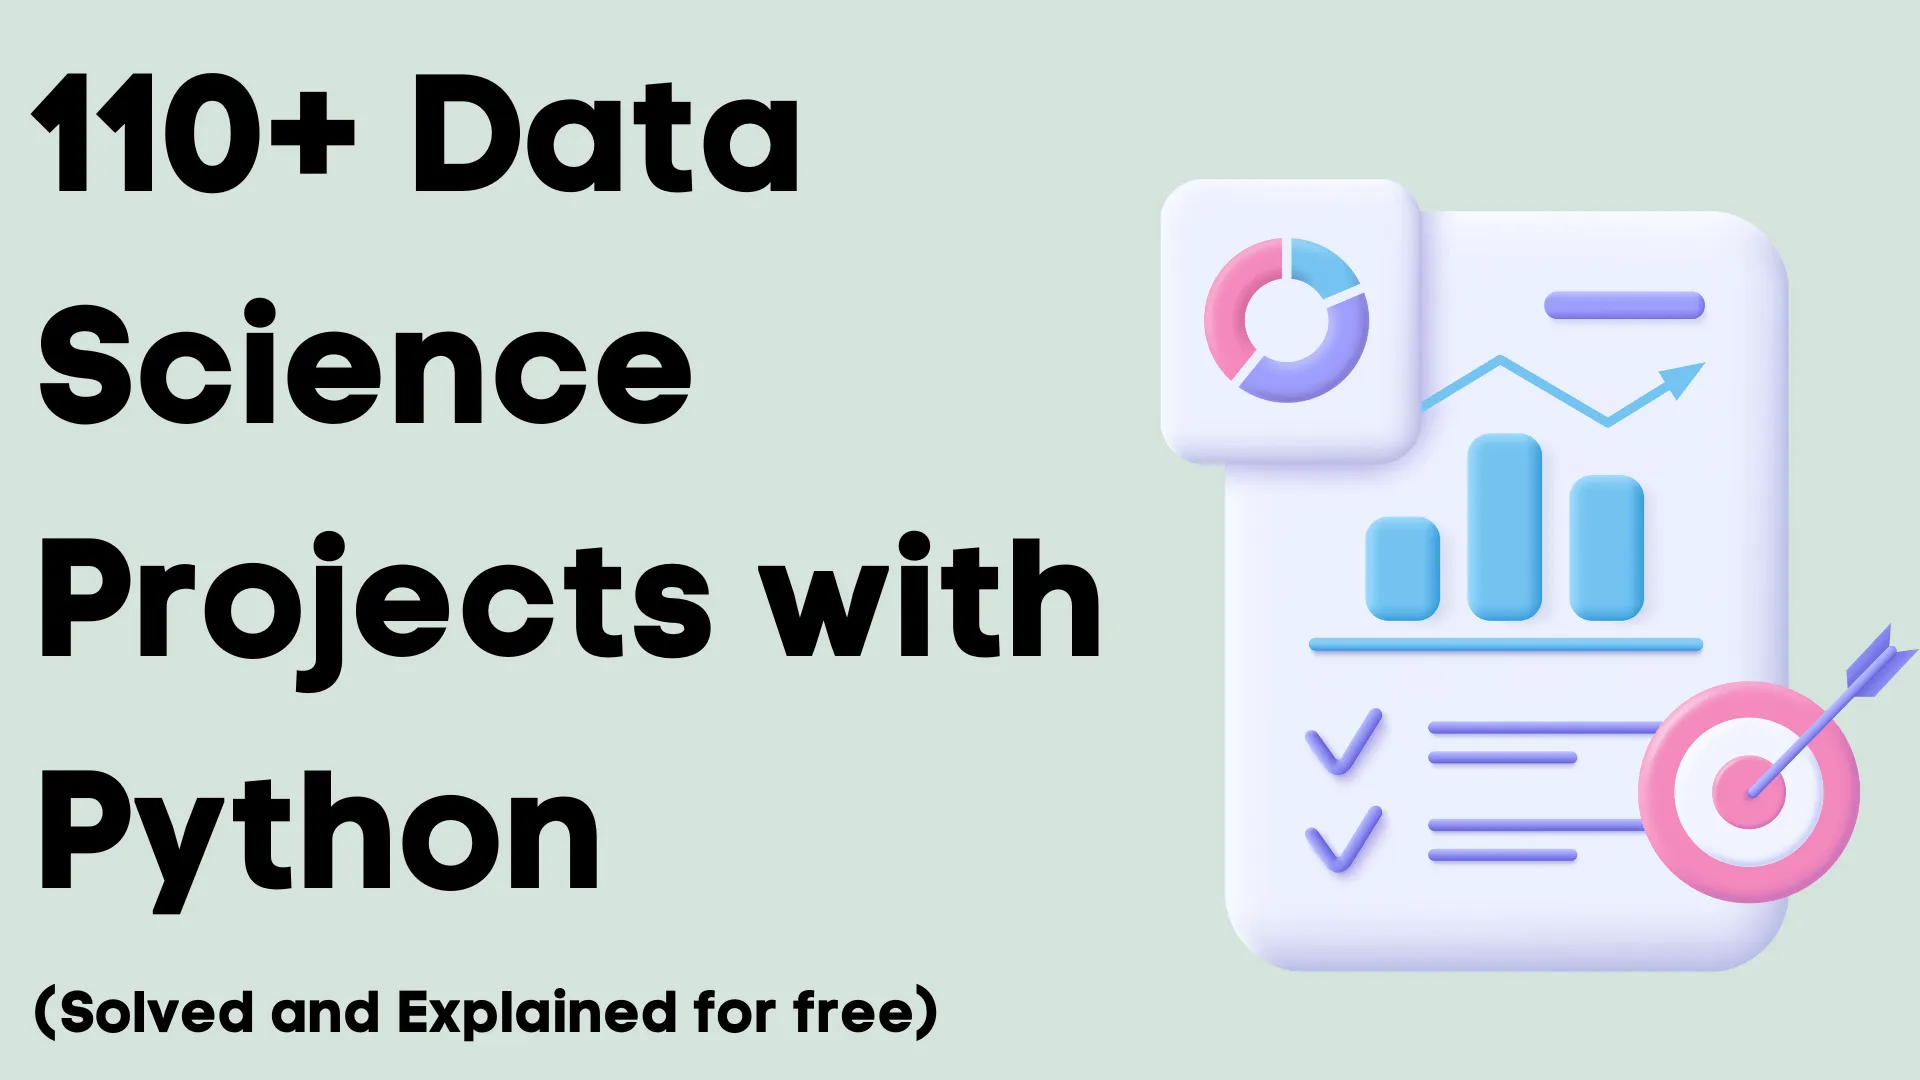 114 data science projects